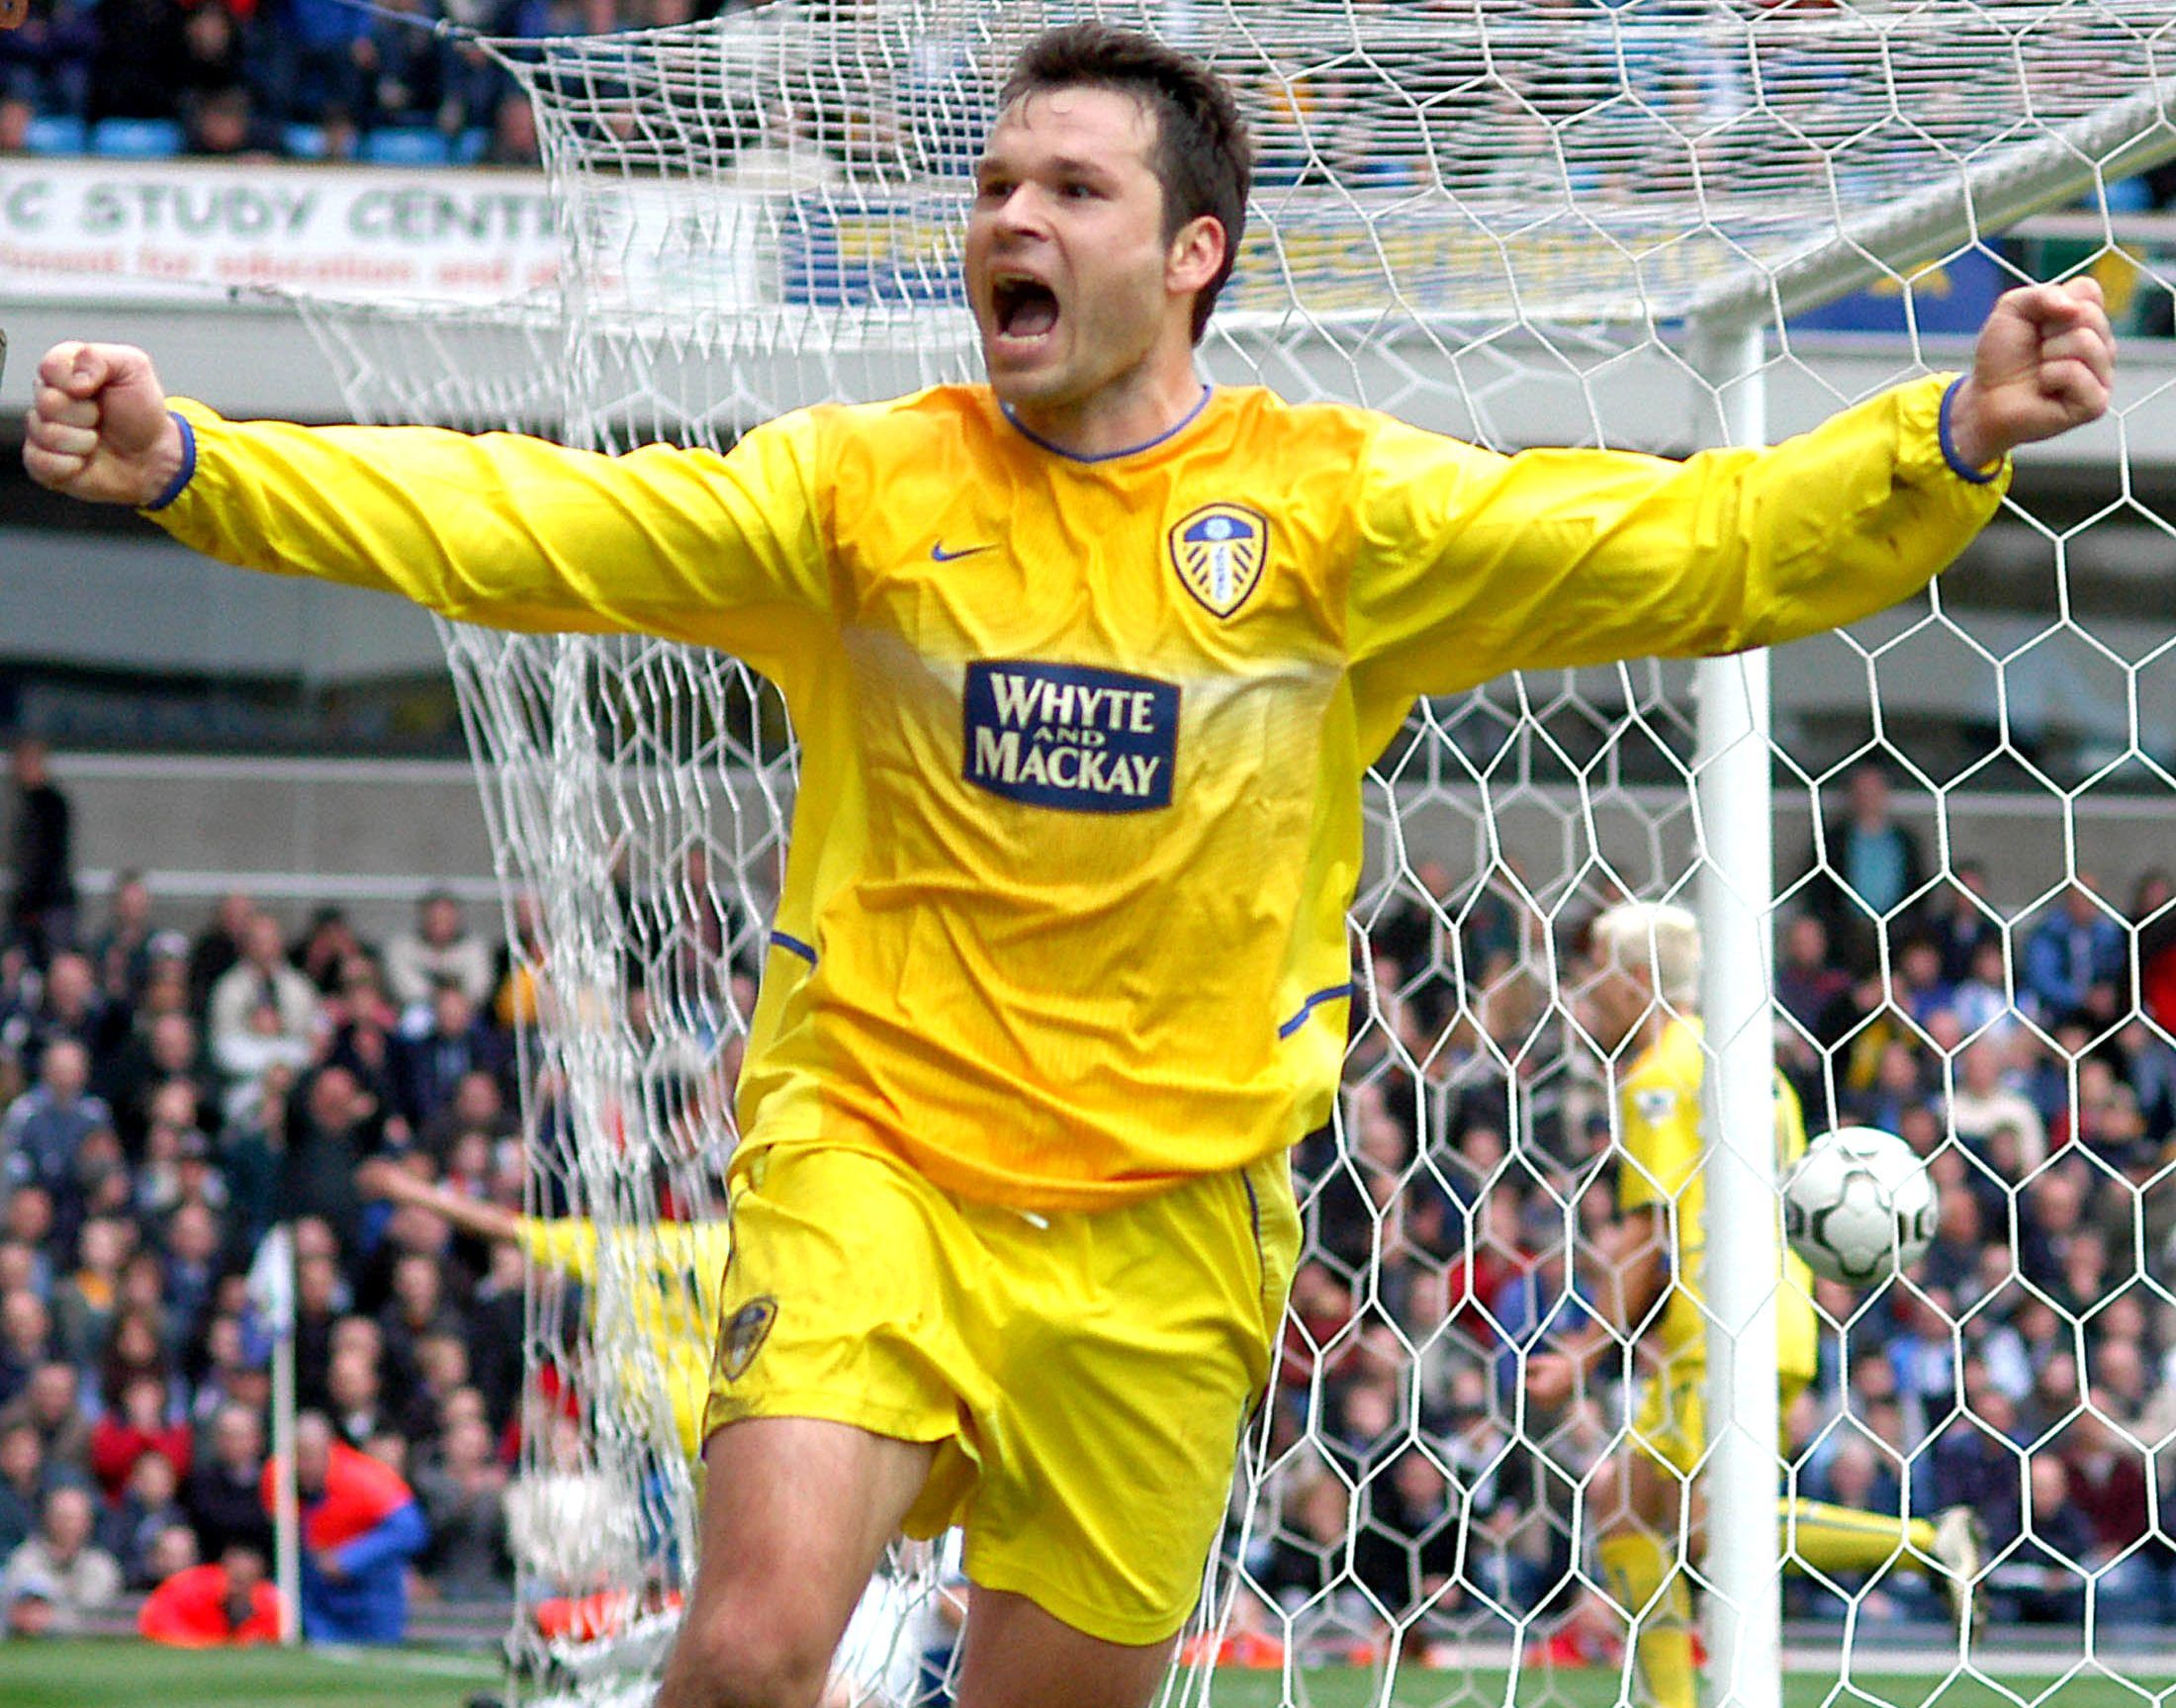 Leeds United's Mark Viduka, of Australia, celebrates his goal against Blackburn Rovers in their English premier league soccer match at Ewood Park, Blackburn, April 10, 2004. NO ONLINE/INTERNET USAGE WITHOUT AN FAPL LICENCE. FOR LICENCE ENQUIRIES SEE WWW.FAPLWEB.COM REUTERS/Matthew Roberts  MR/MD/ACM